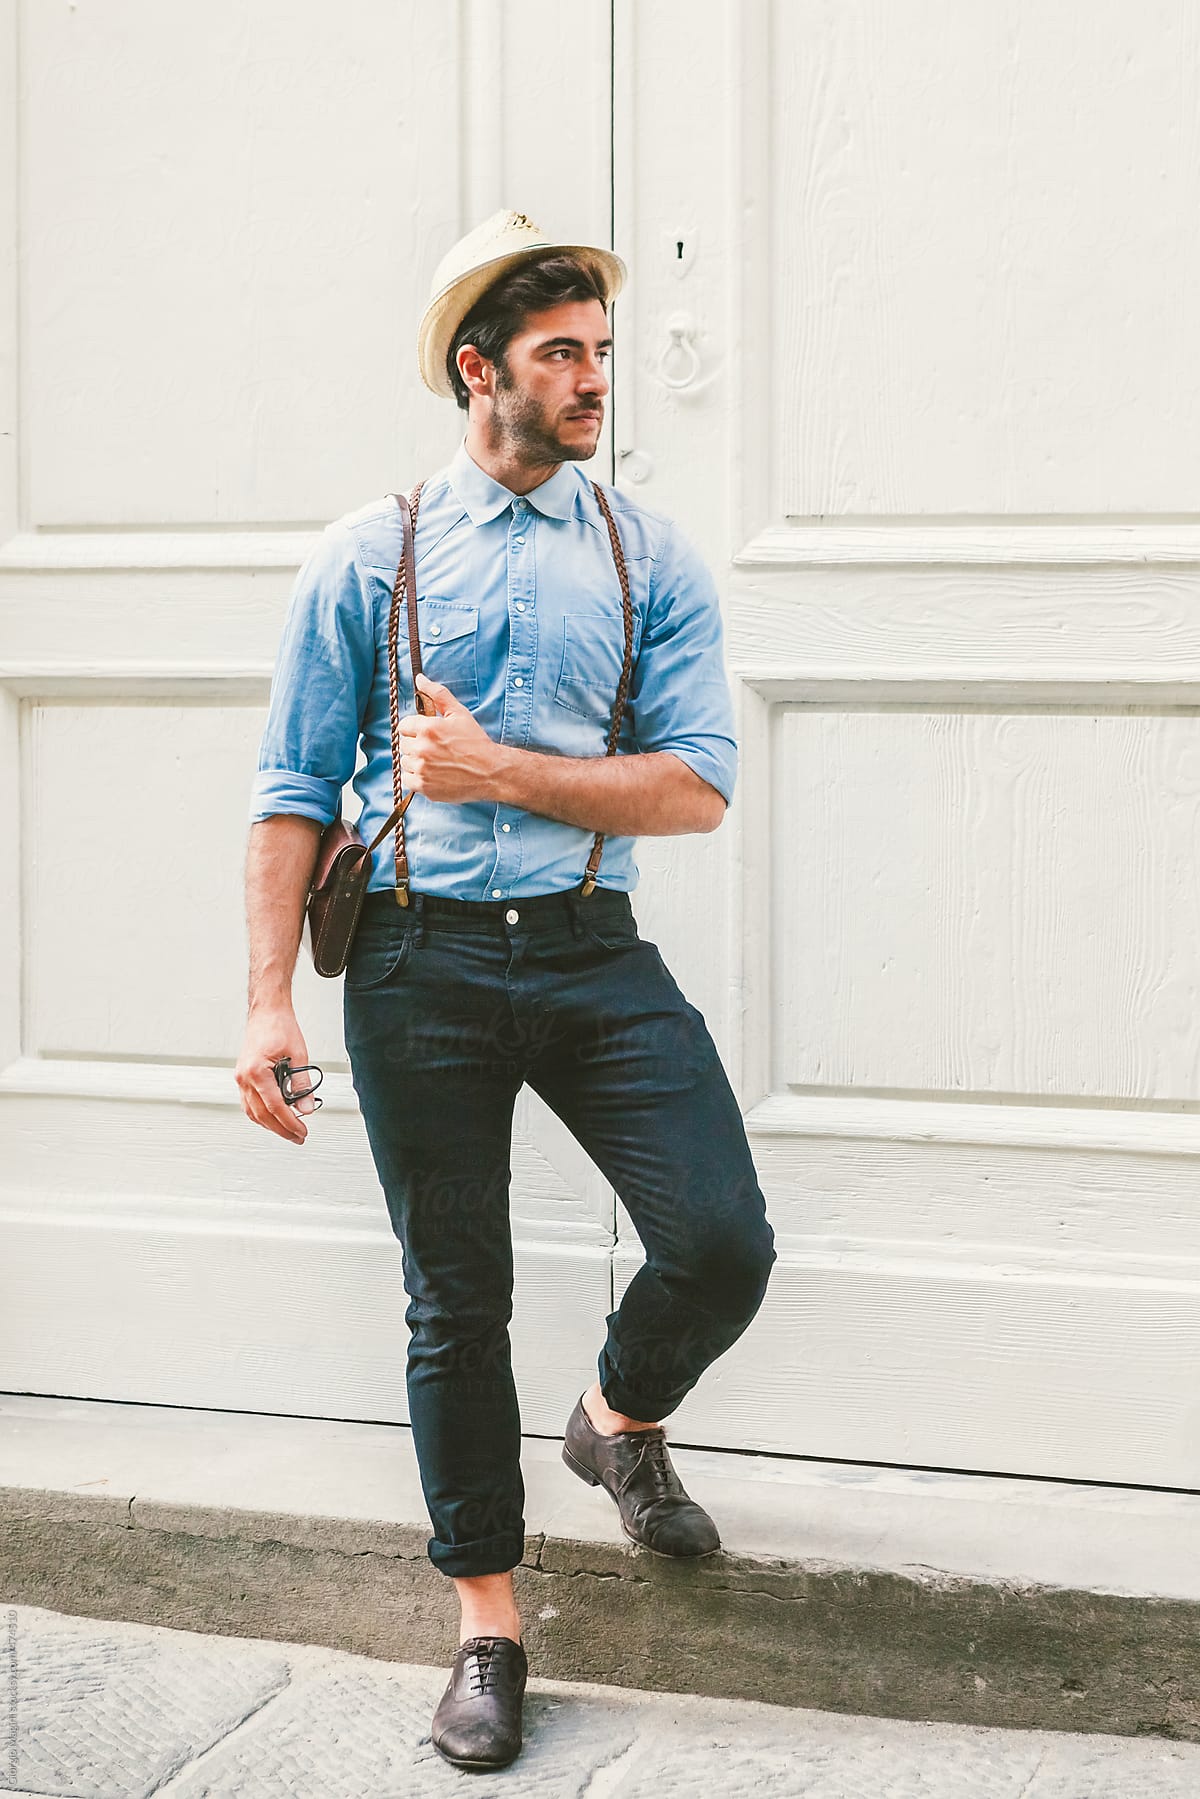 Handsome Hipster Man in front of a White Wooden Door